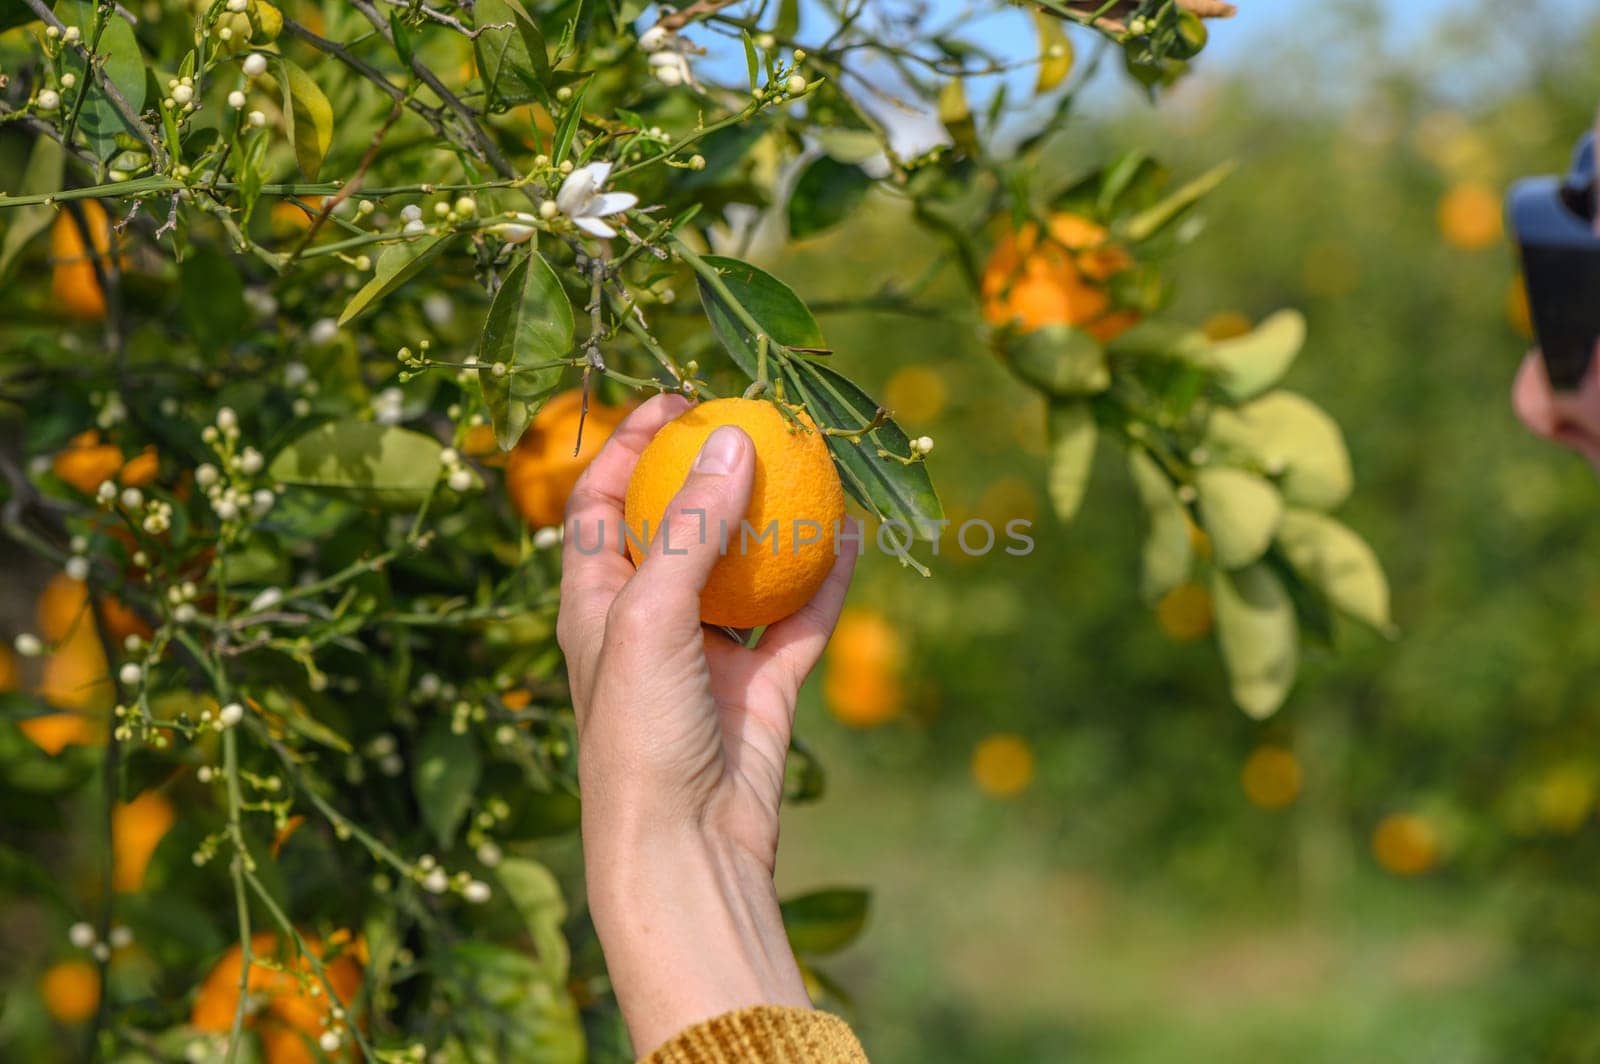 Woman picking orange from tree 1 by Mixa74